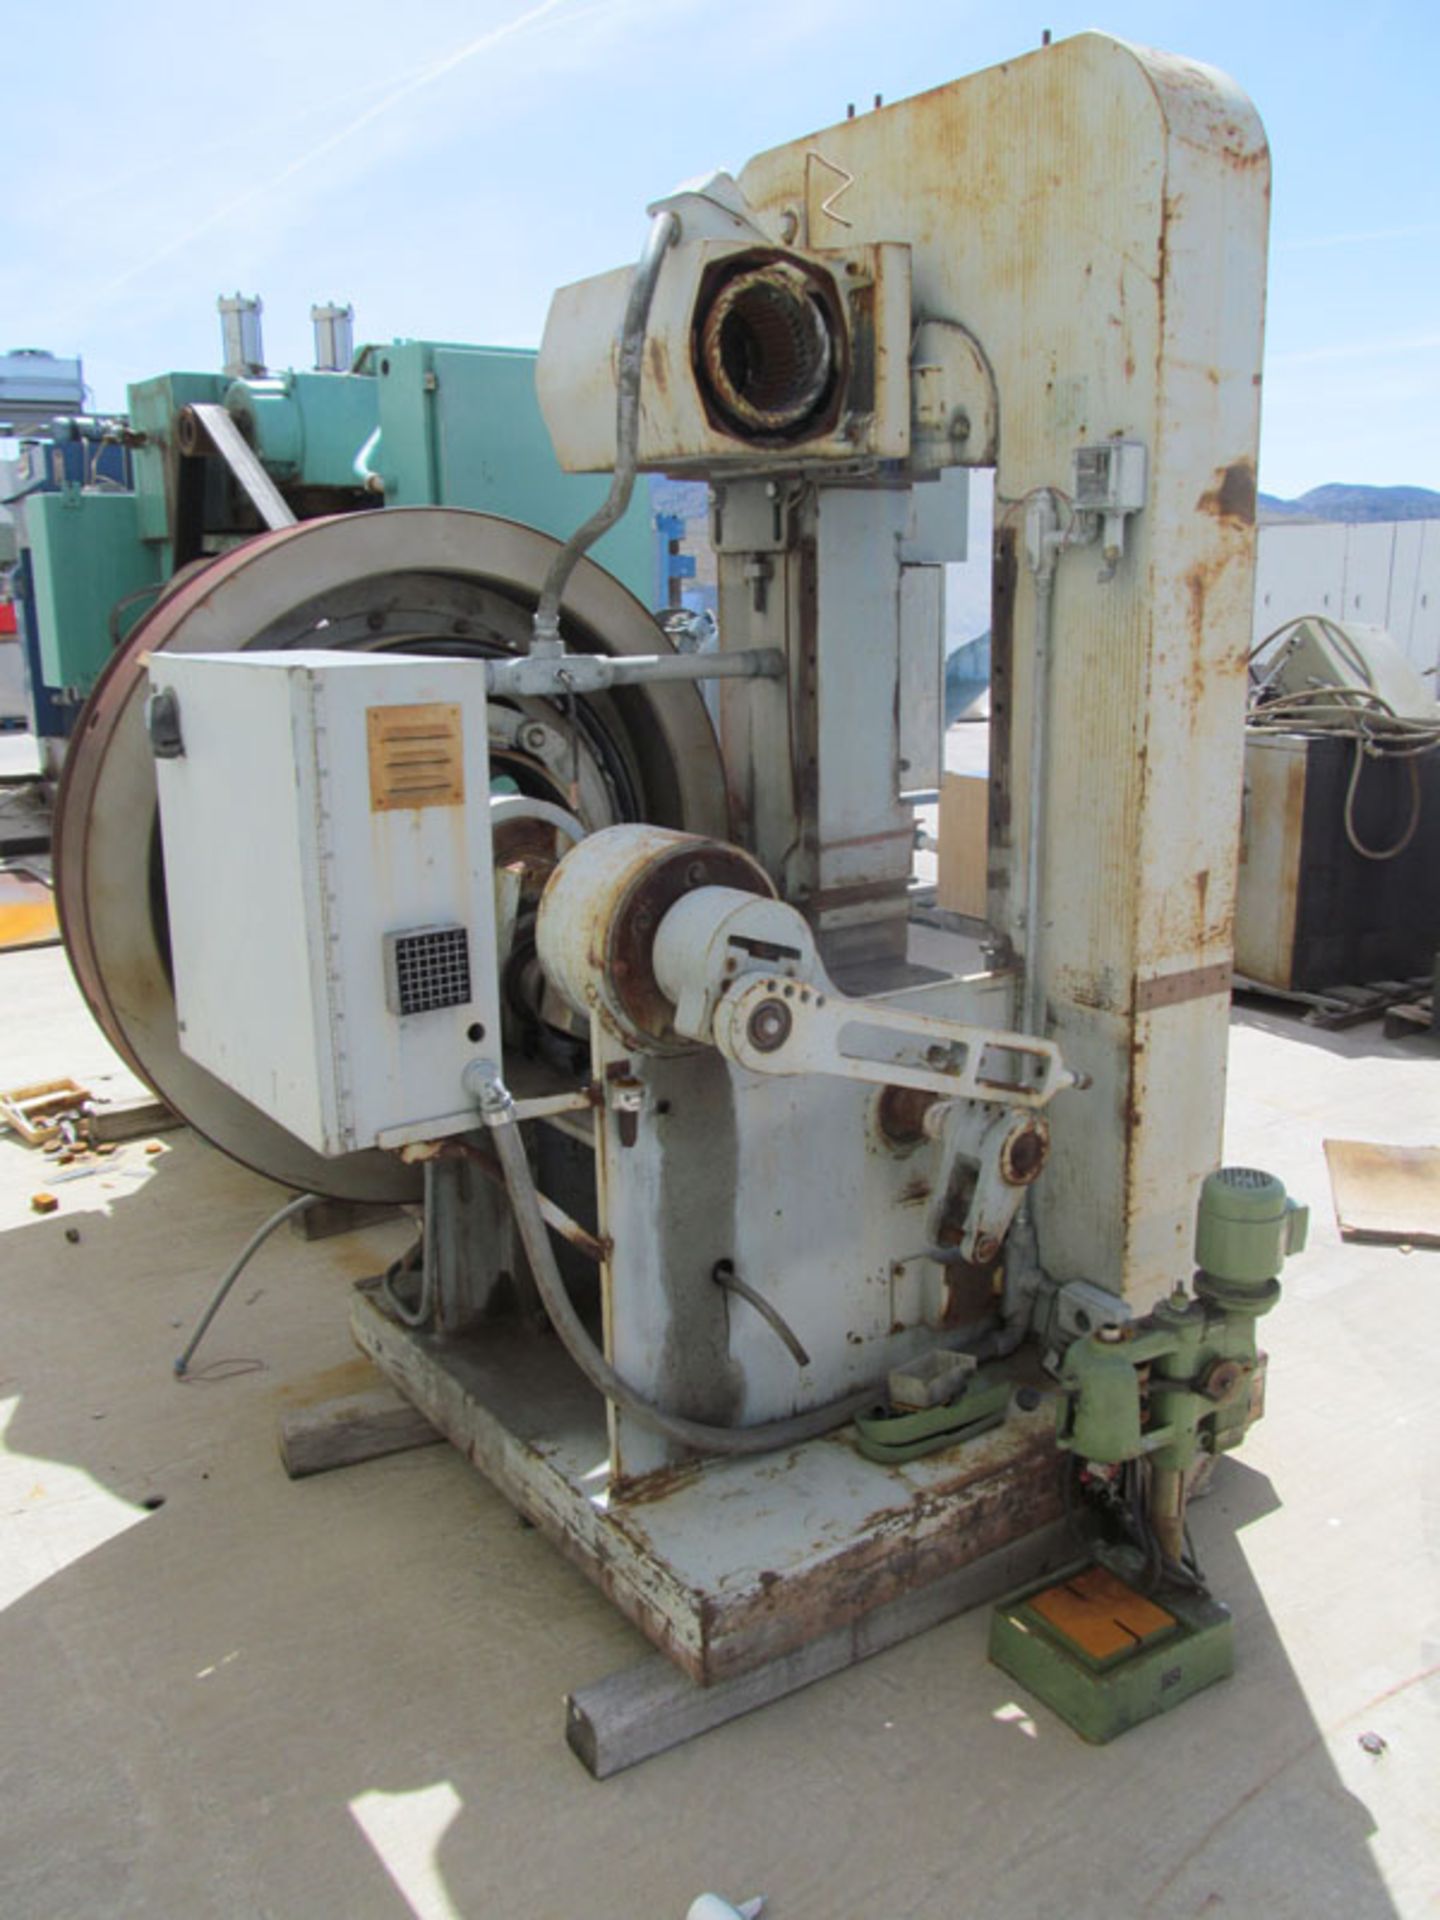 Lot of (2) Columbia 360 Ton Knuckle Joint Presses, (Not Complete, Parts Machines), Loading Fee: $350 - Image 2 of 3